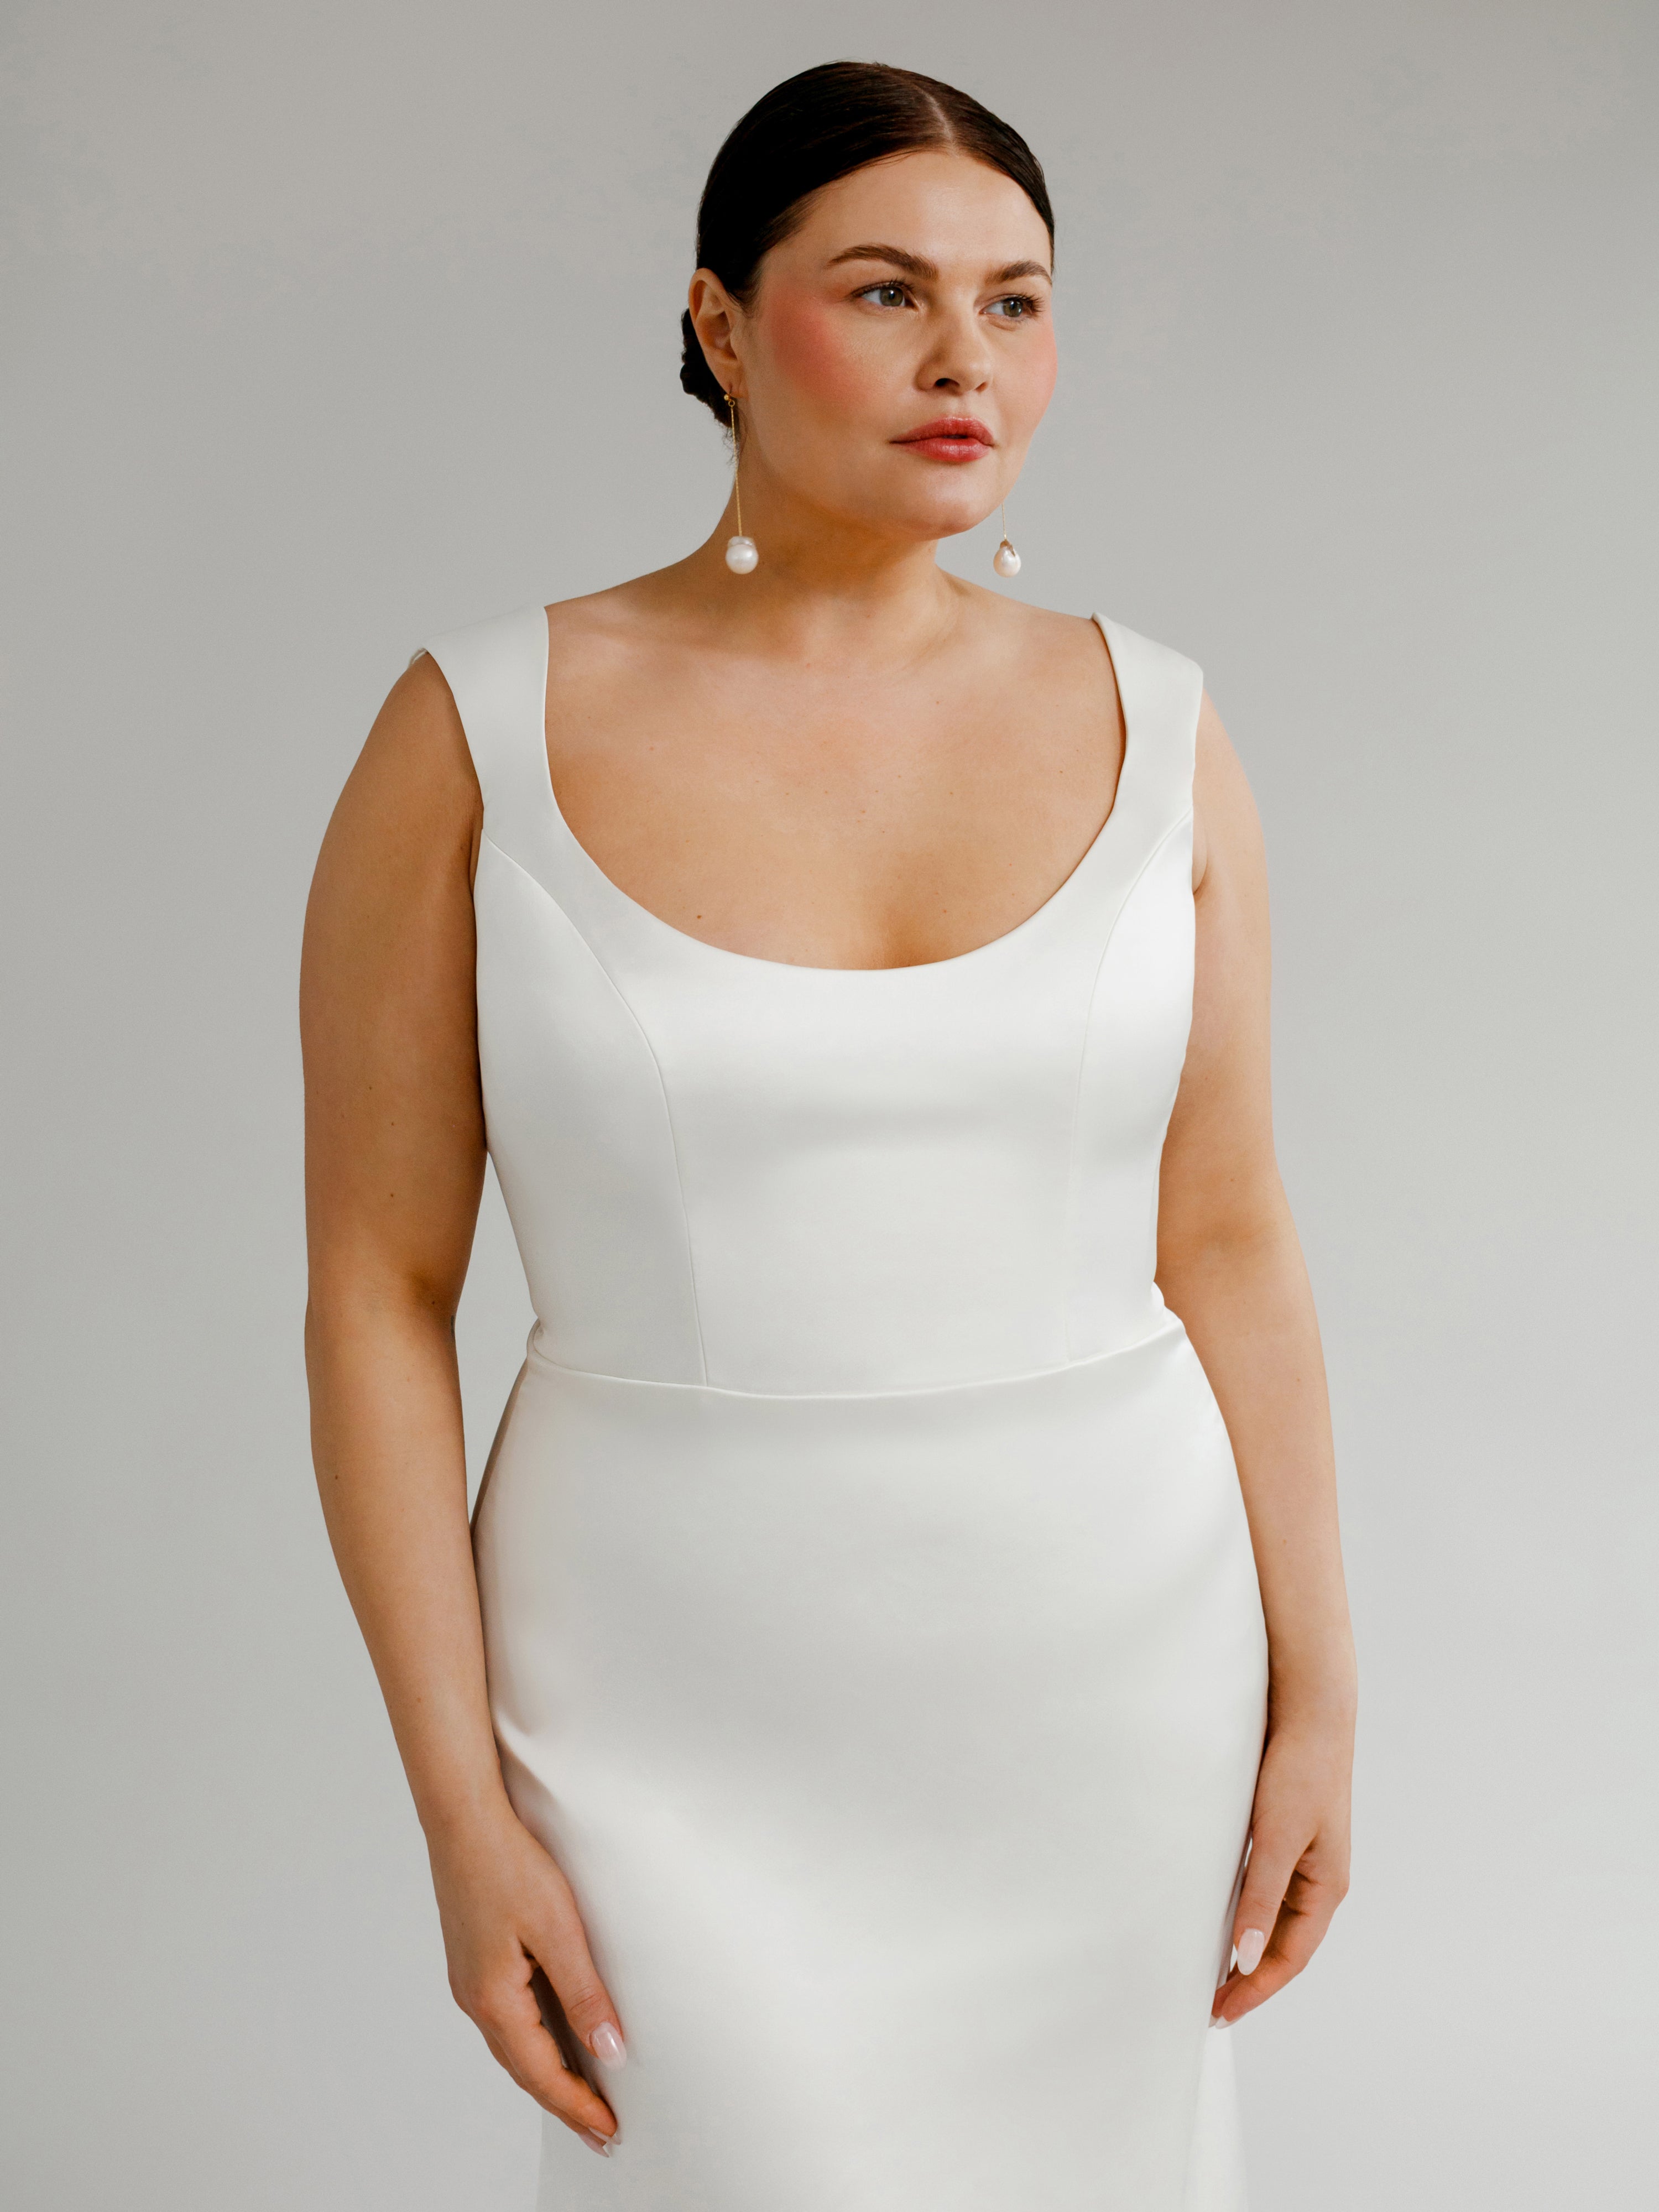 Adrian : A sleek wedding gown with a low scoopneck, curved straps, and buttons